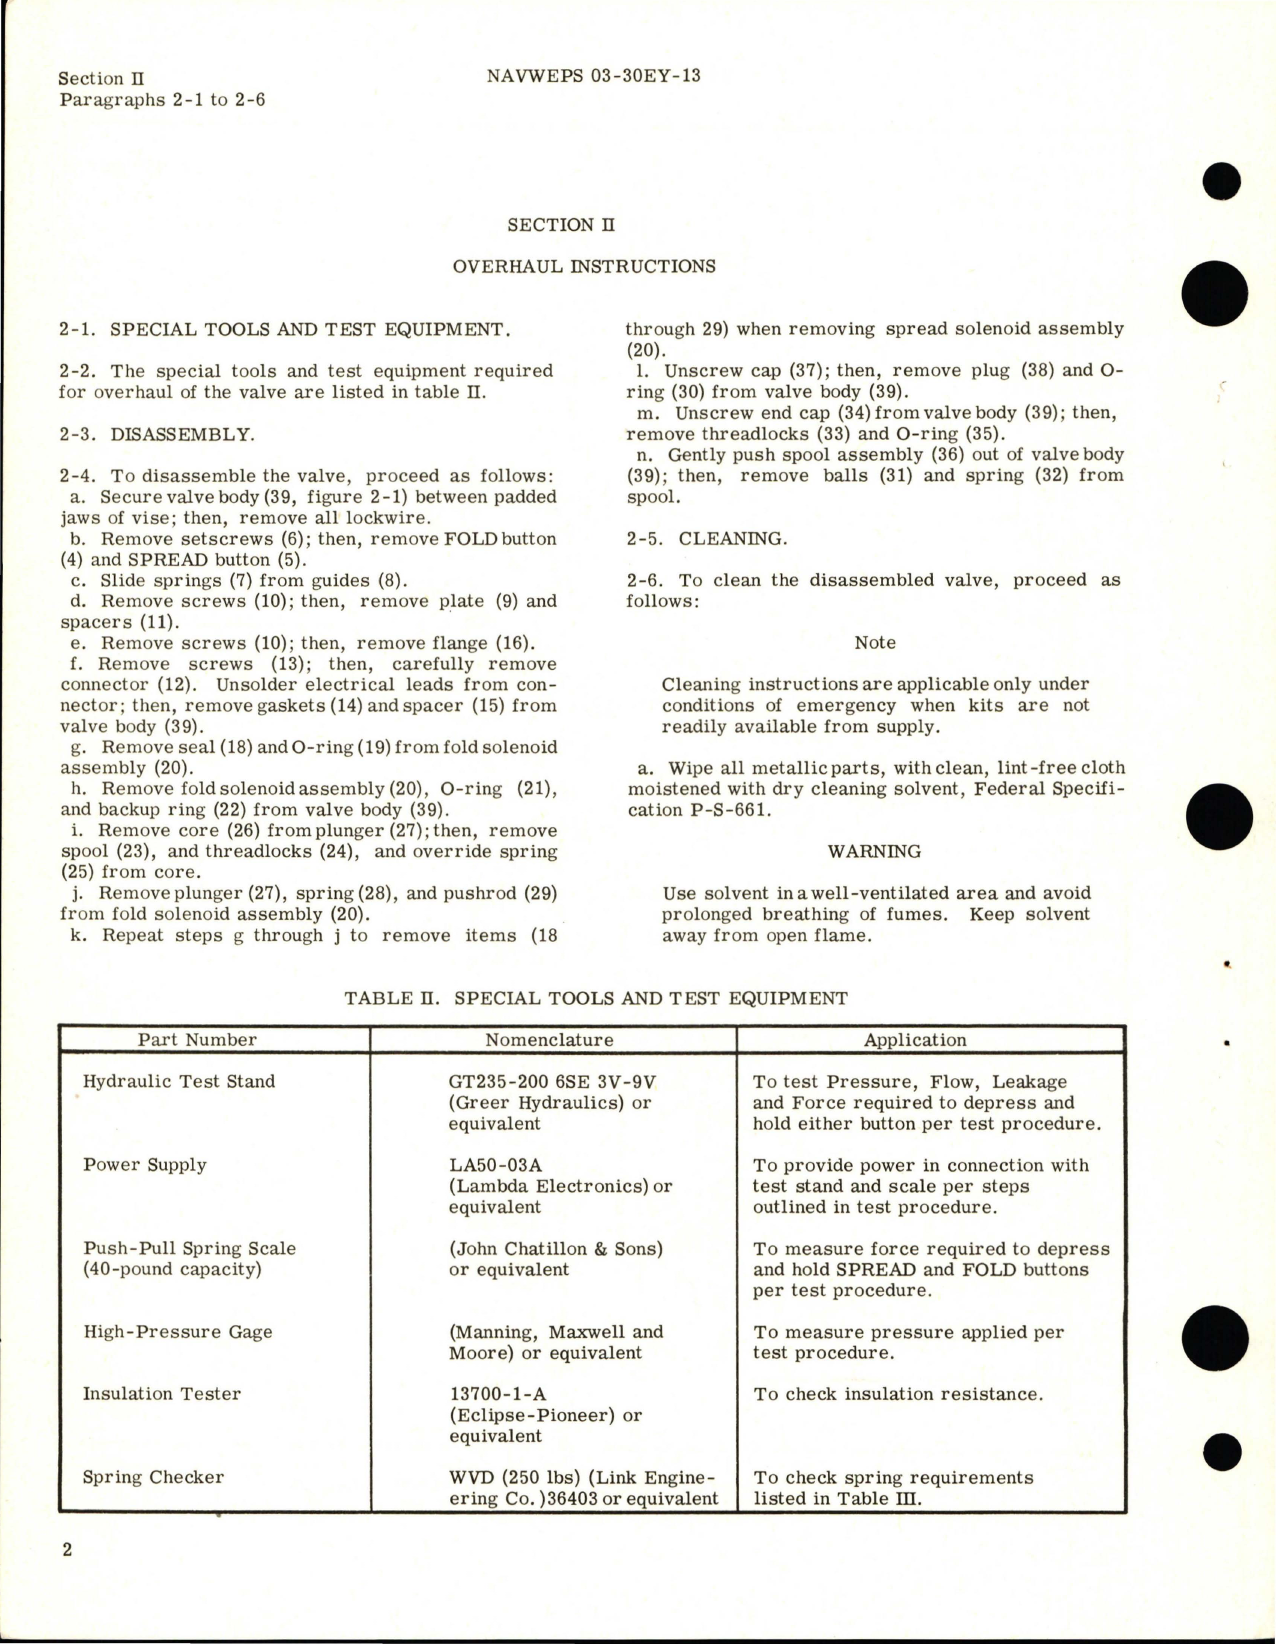 Sample page 6 from AirCorps Library document: Overhaul Instructions for Wing Fold Selector Valve - Part 730100